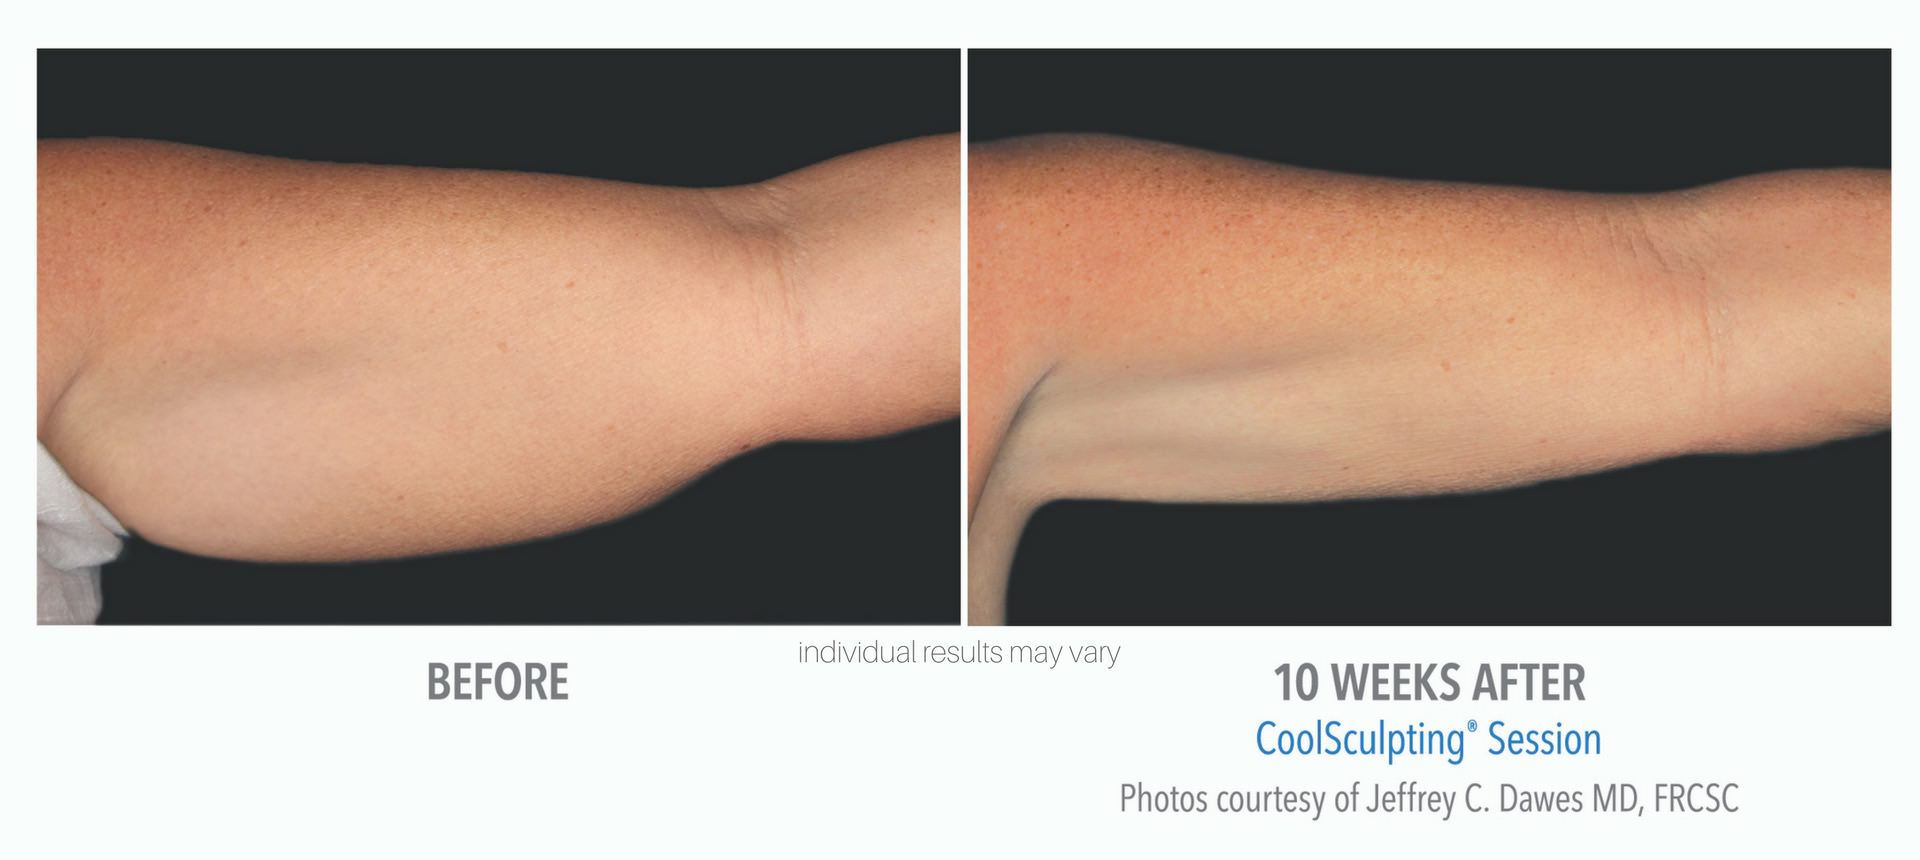 coolsculpting-before-and-after-photos-4